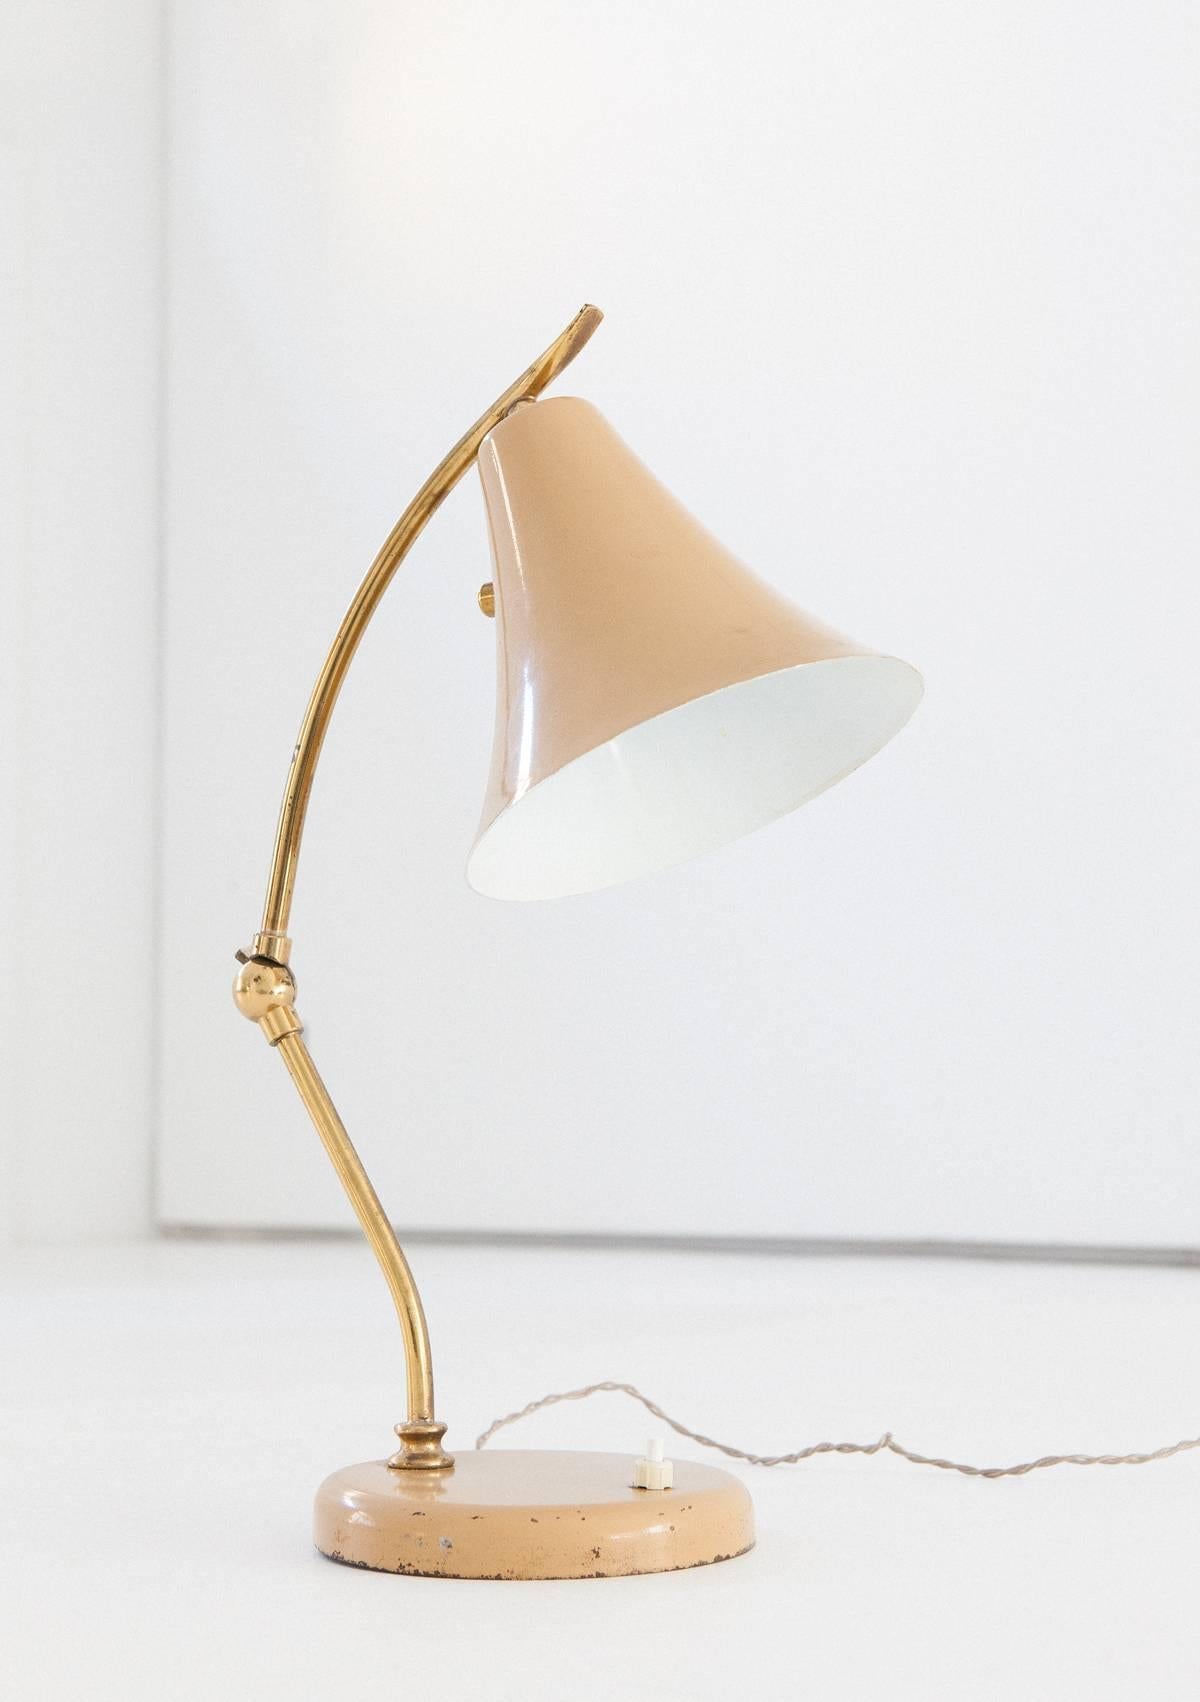 A table lamp manufactured in Italy during the 1950s
Brass frame with a hinge that allows to change the angle and therefore vary the diffuser height

The wire is original and functional but you can ask for a new one.
  